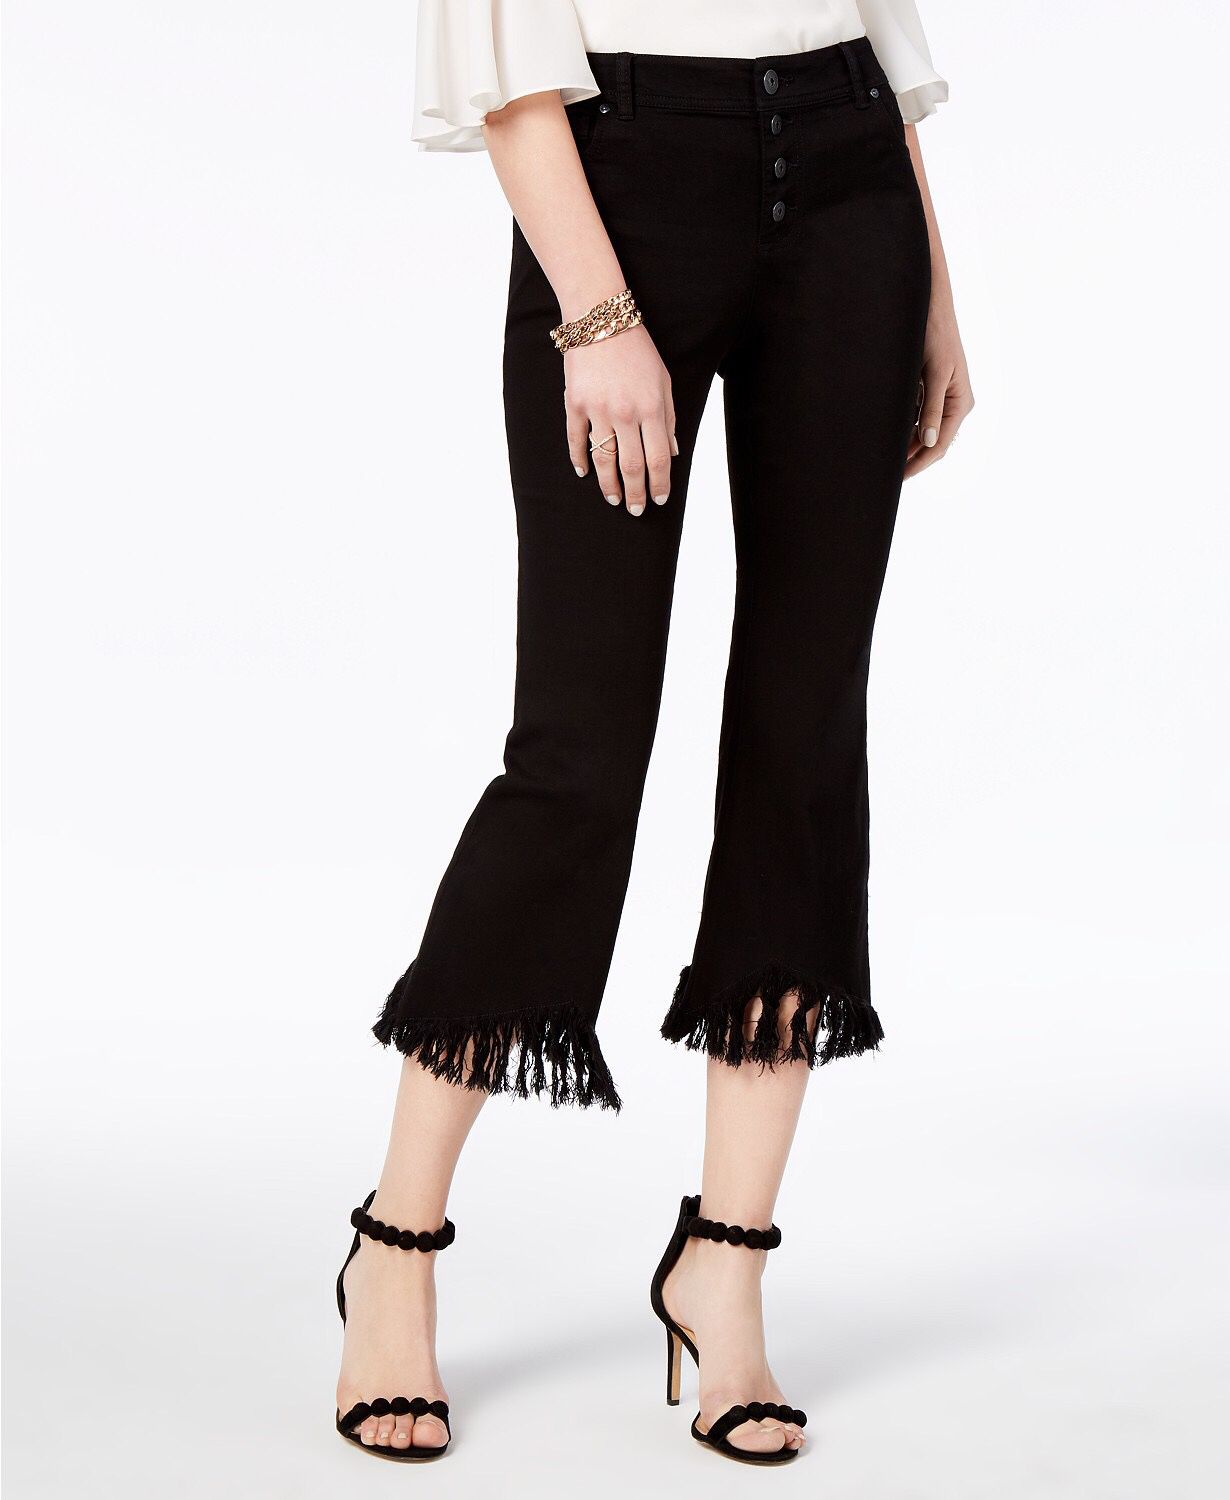 Inc Cropped Fringe-Trim Jeans, Created for Macy's - Black Size 12